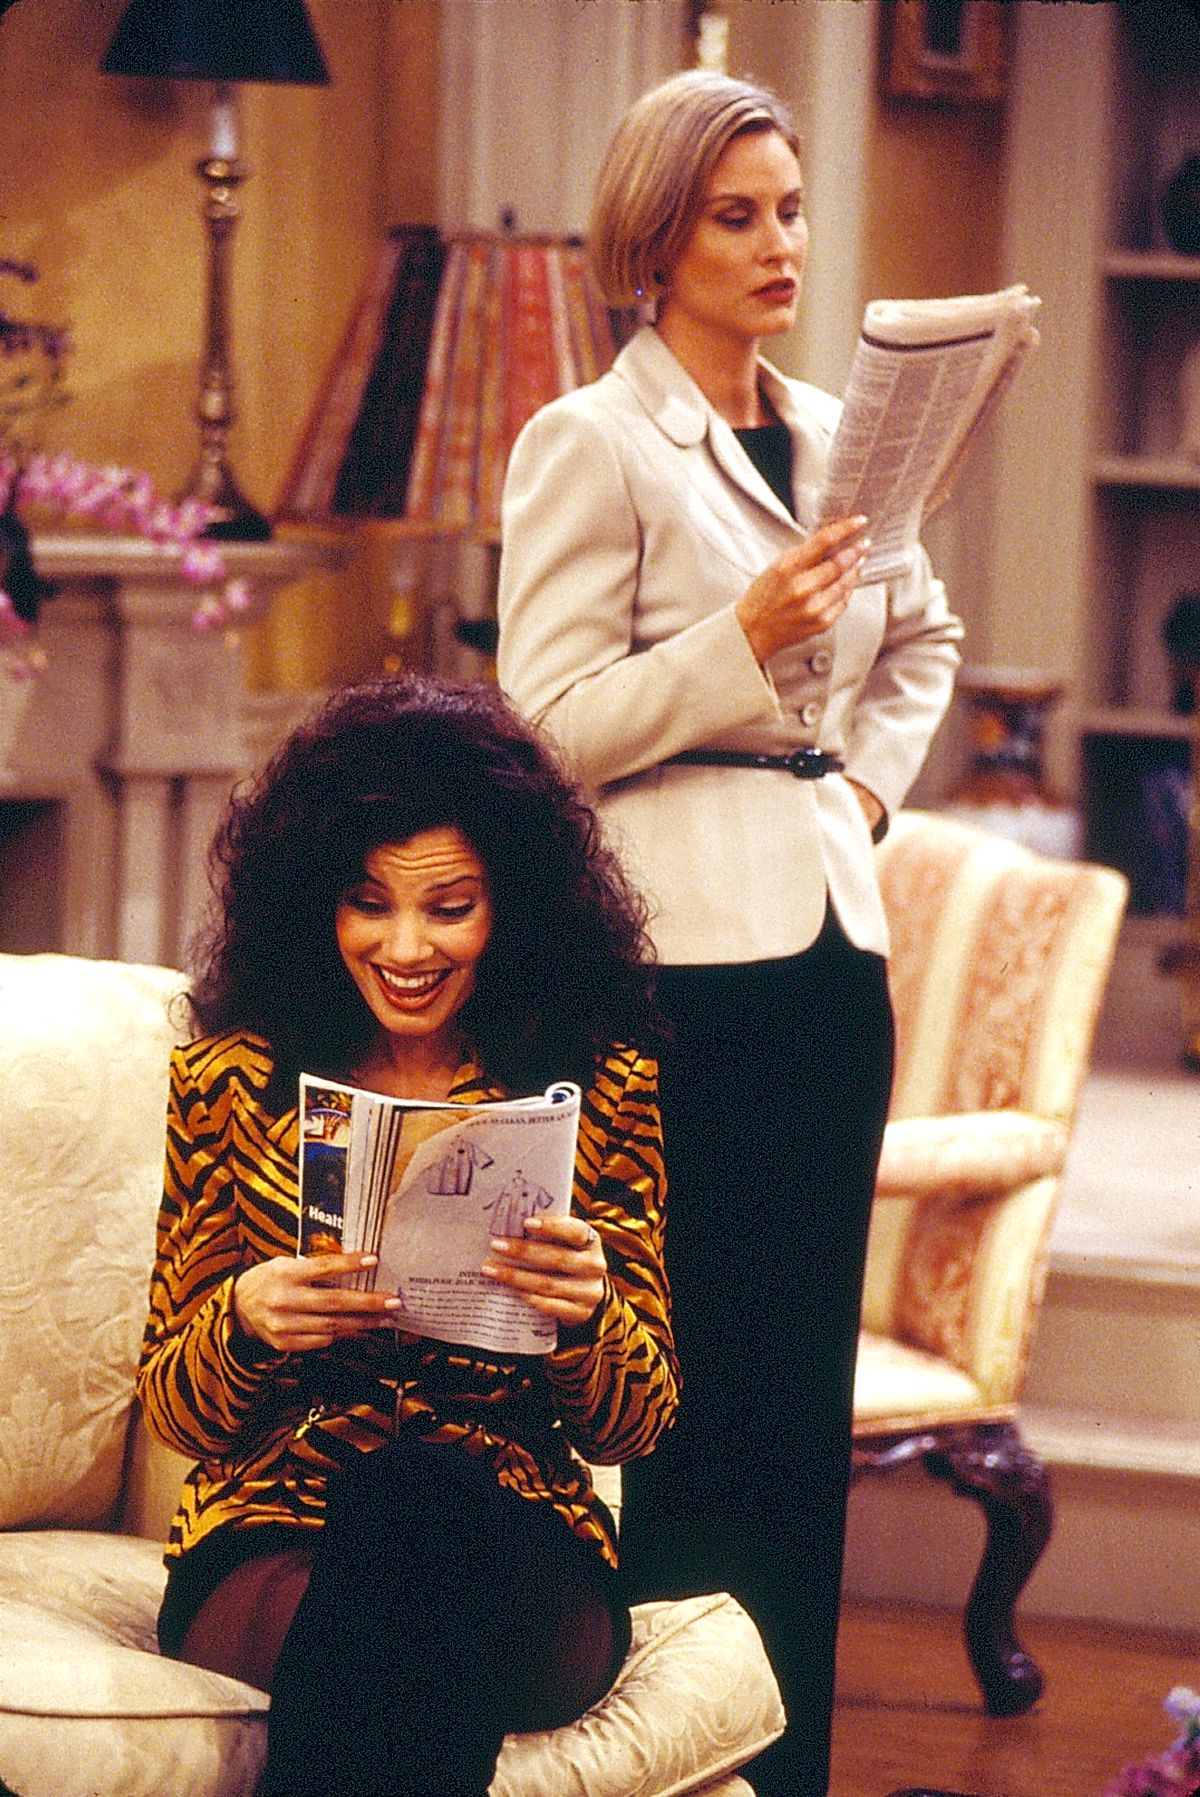 On the set of The Nanny, Fran Drescher (as Fran Fine) sits on the couch and reads a magazine, while Lauren Lane (as C.C. Babcock) stands and holds a newspaper.